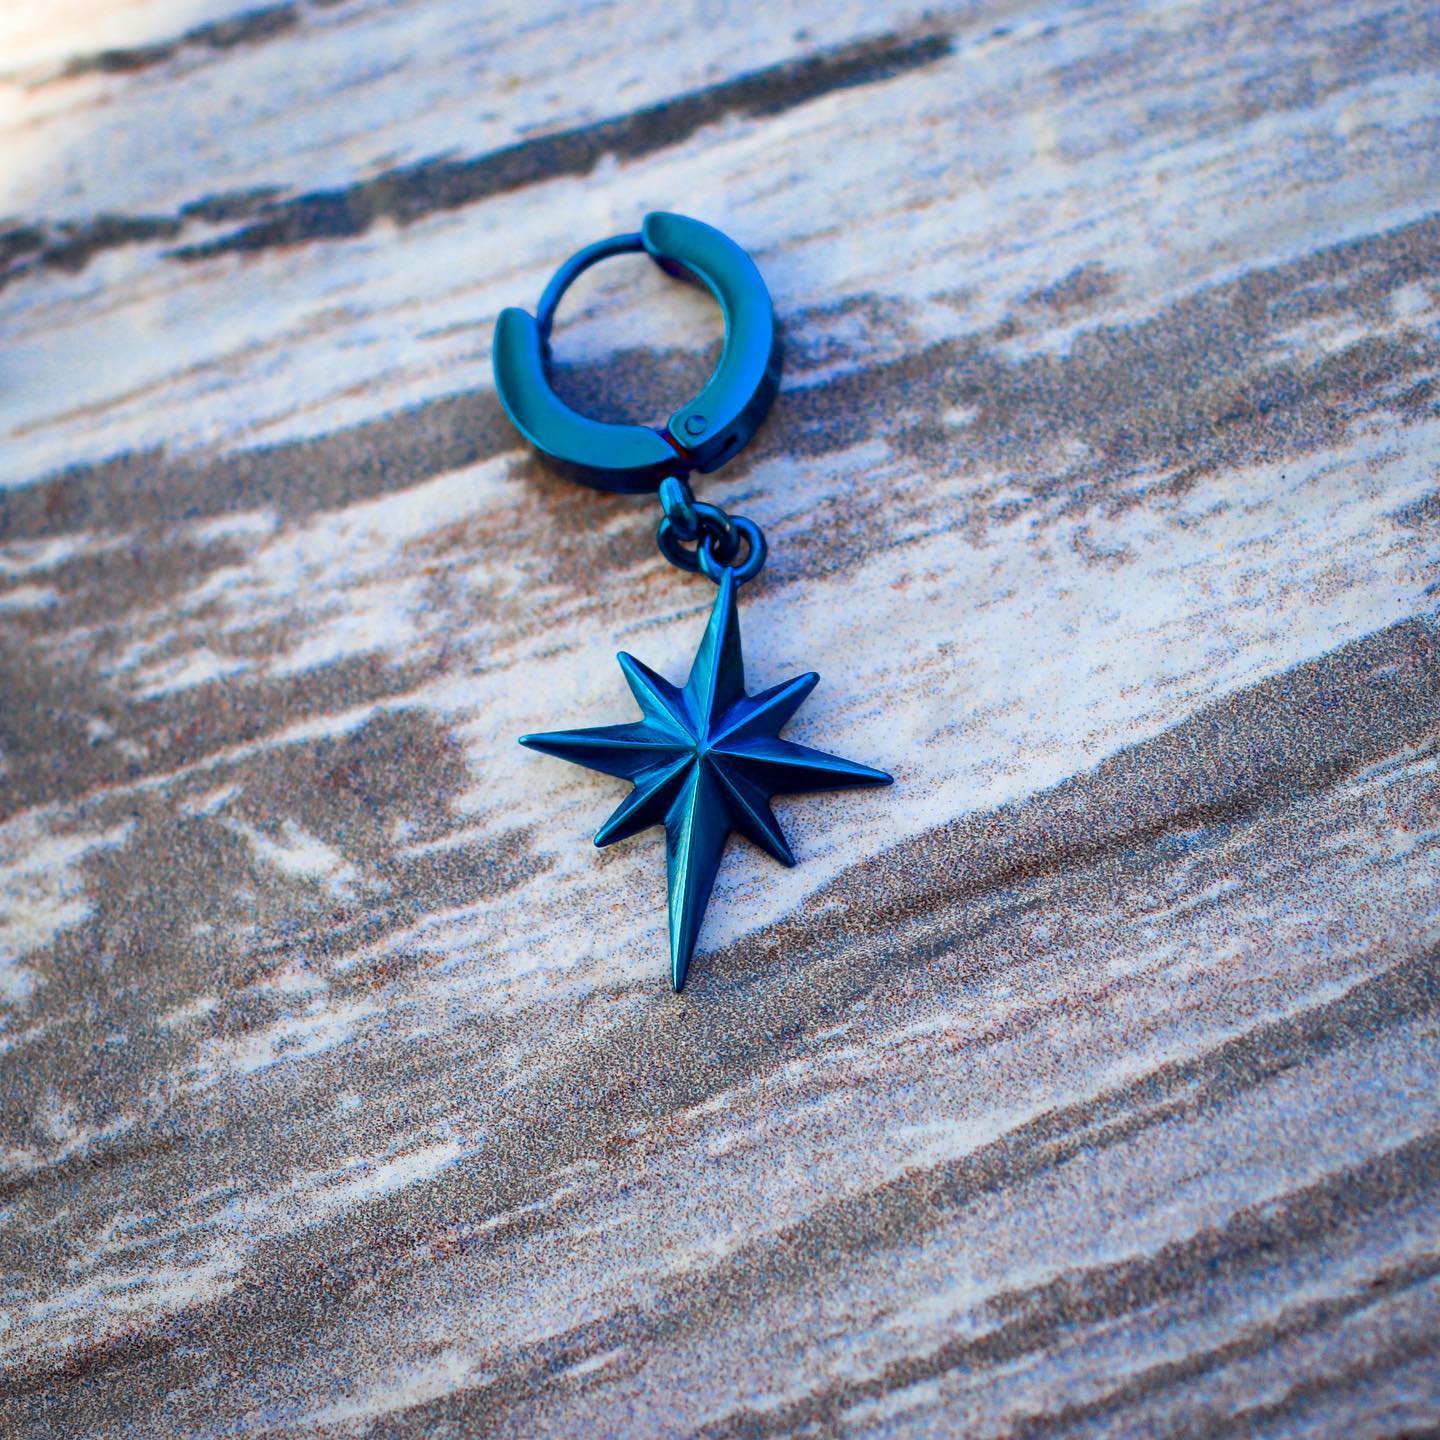 The North Star Earring now...